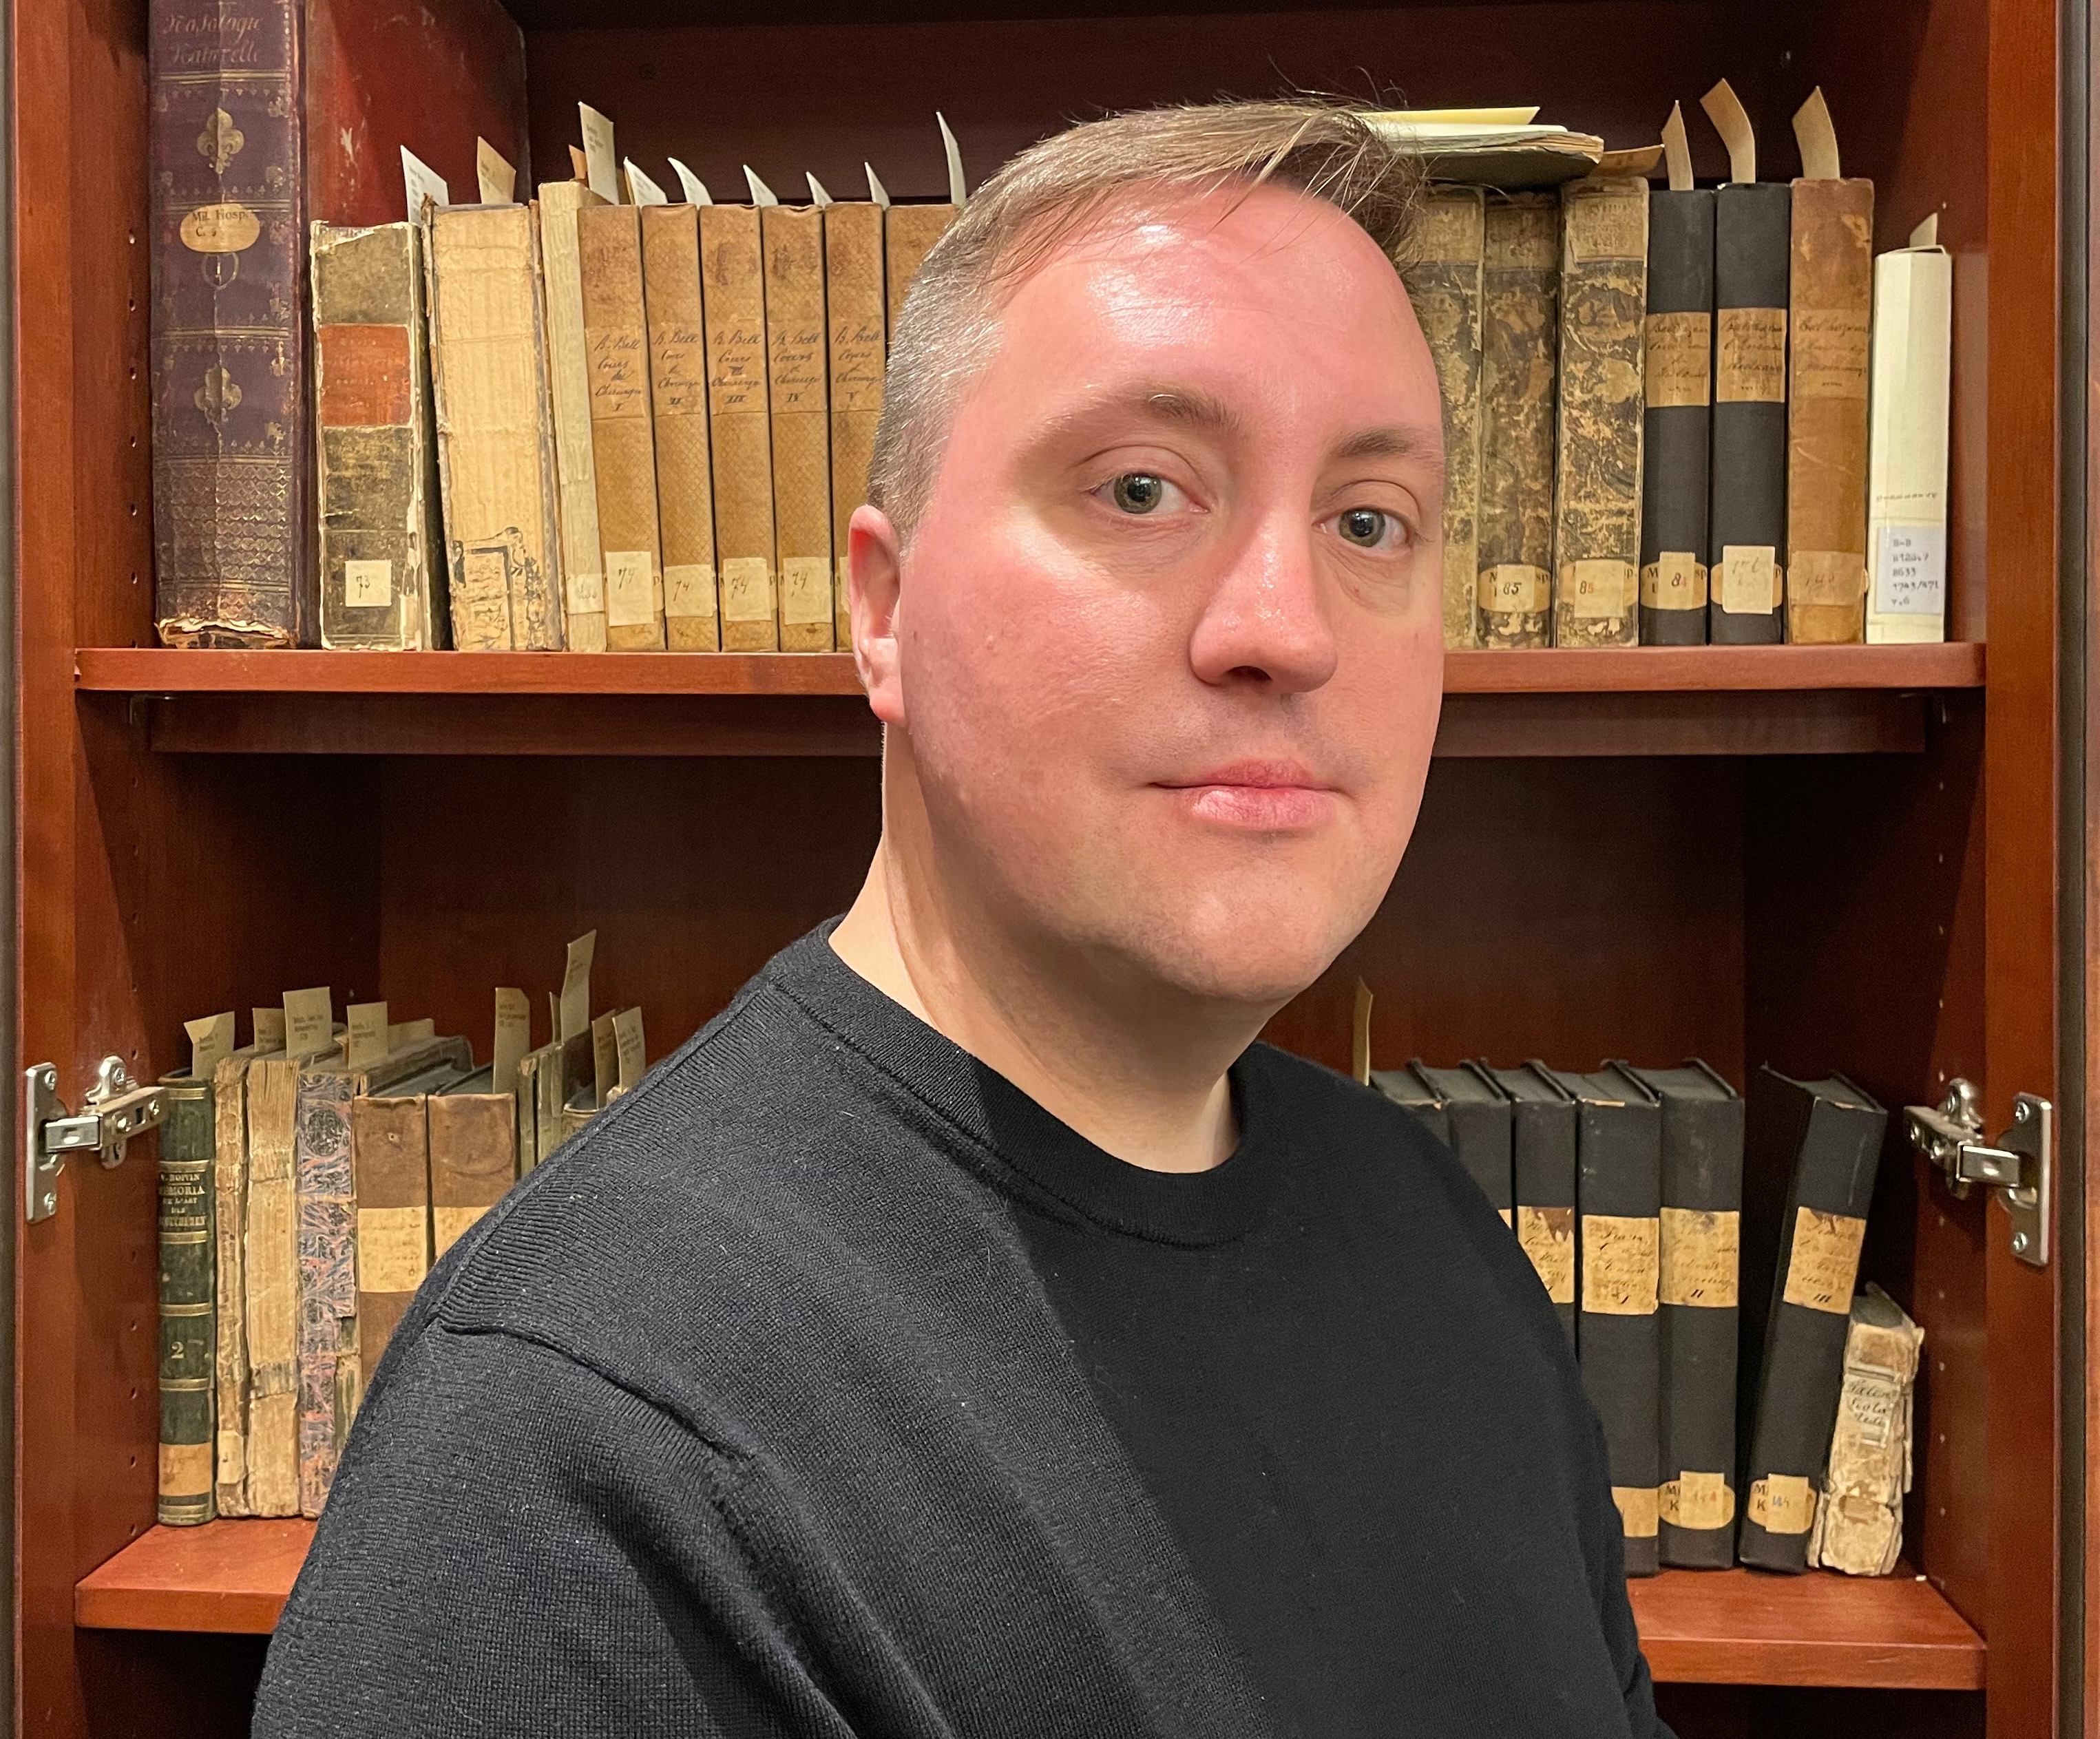 Man wearing a dark shirt softly smiling in front of books.